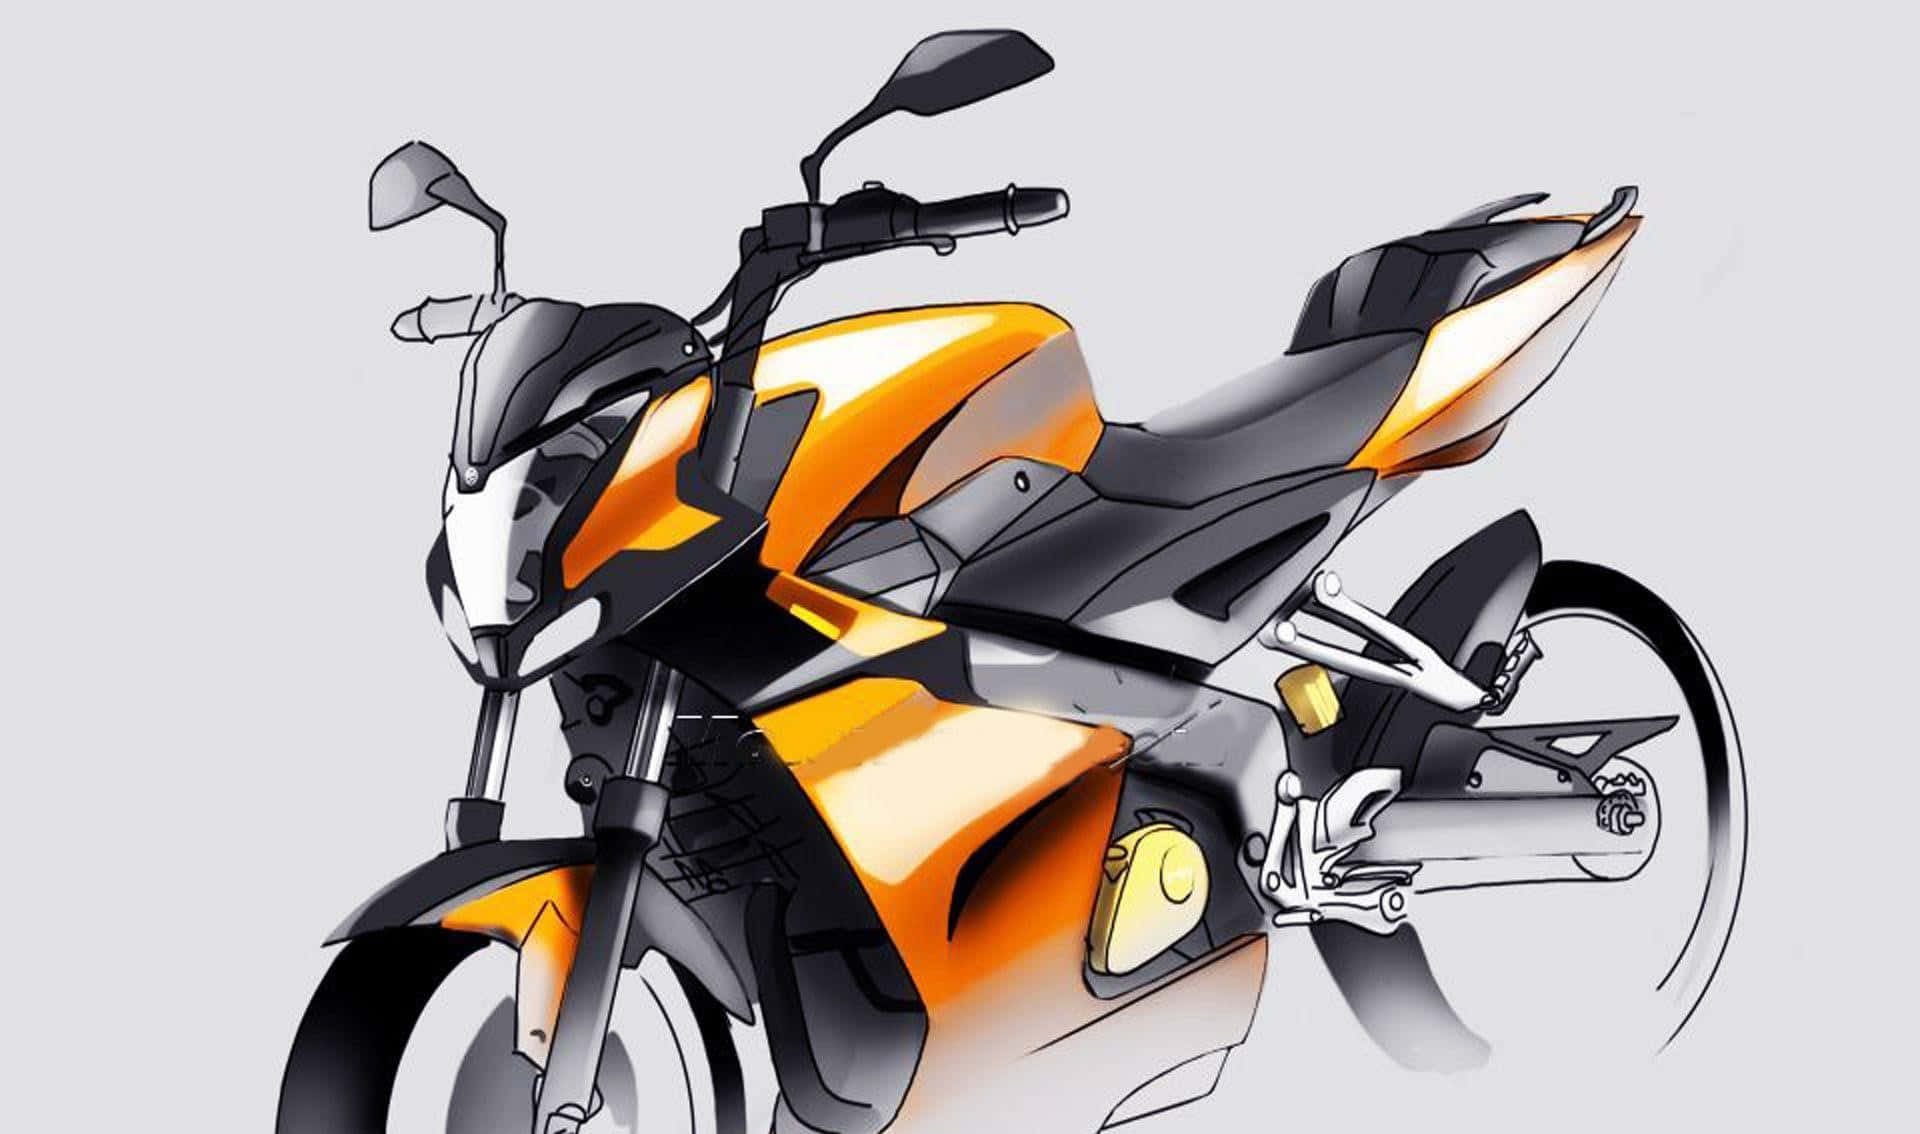 A Drawing Of A Motorcycle With Orange And Black Colors